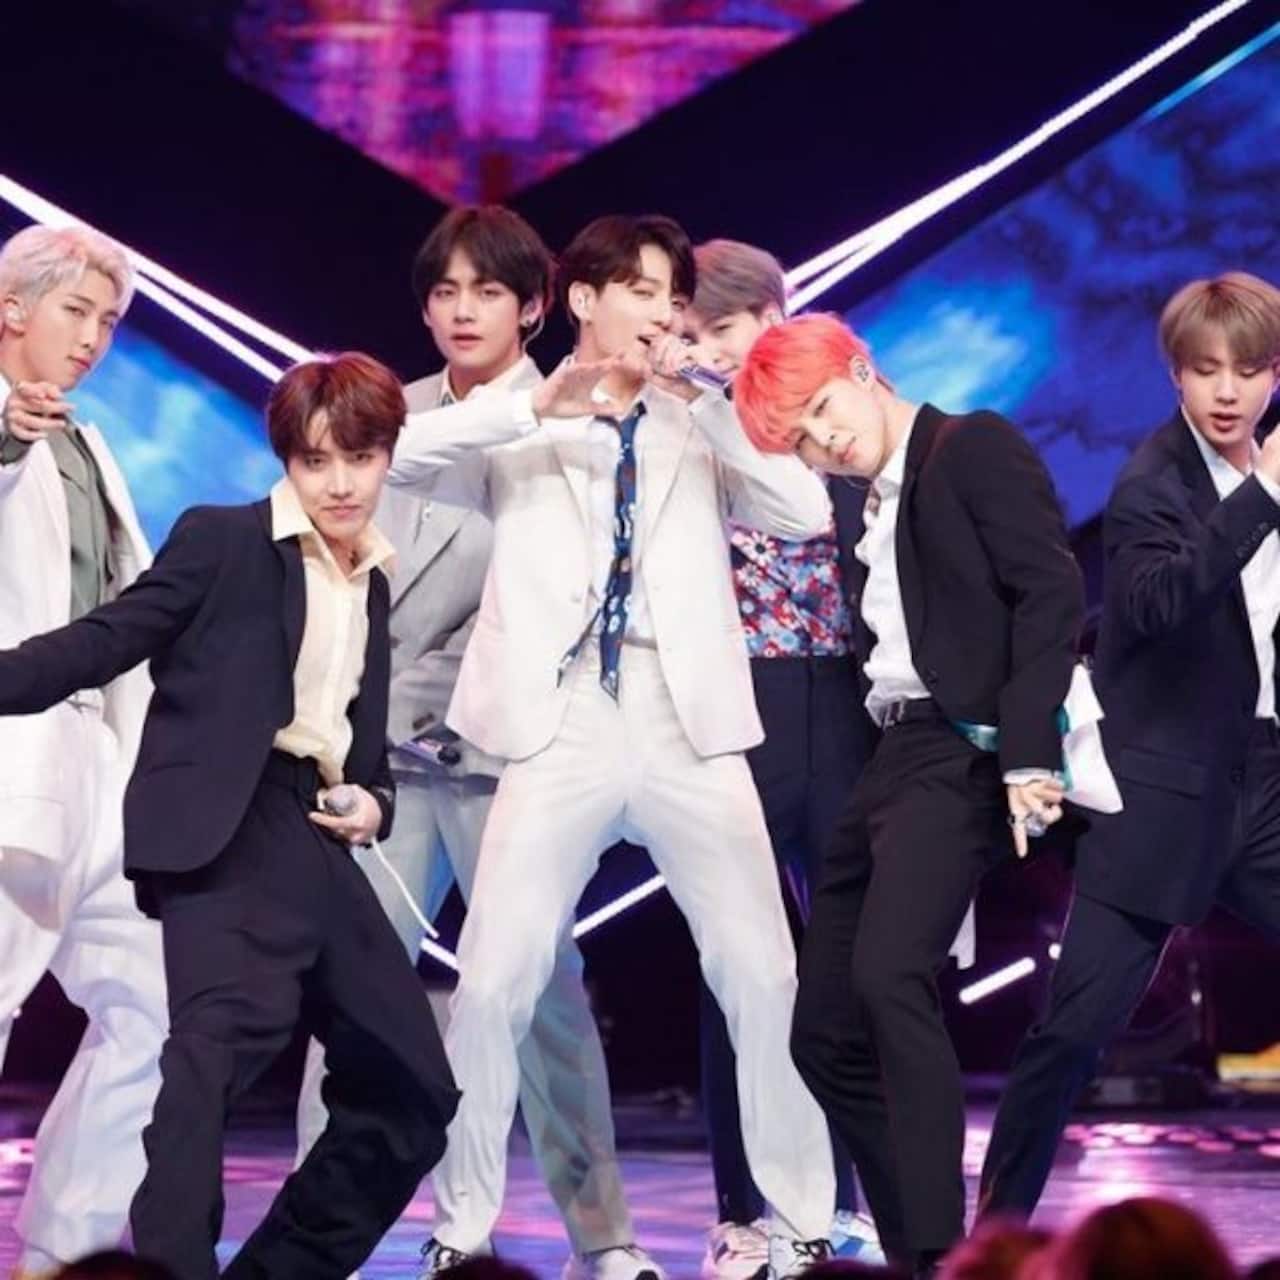 Twitter celebrates with joy after witnessing BTS' breakthrough maiden performance at Wembley Stadium